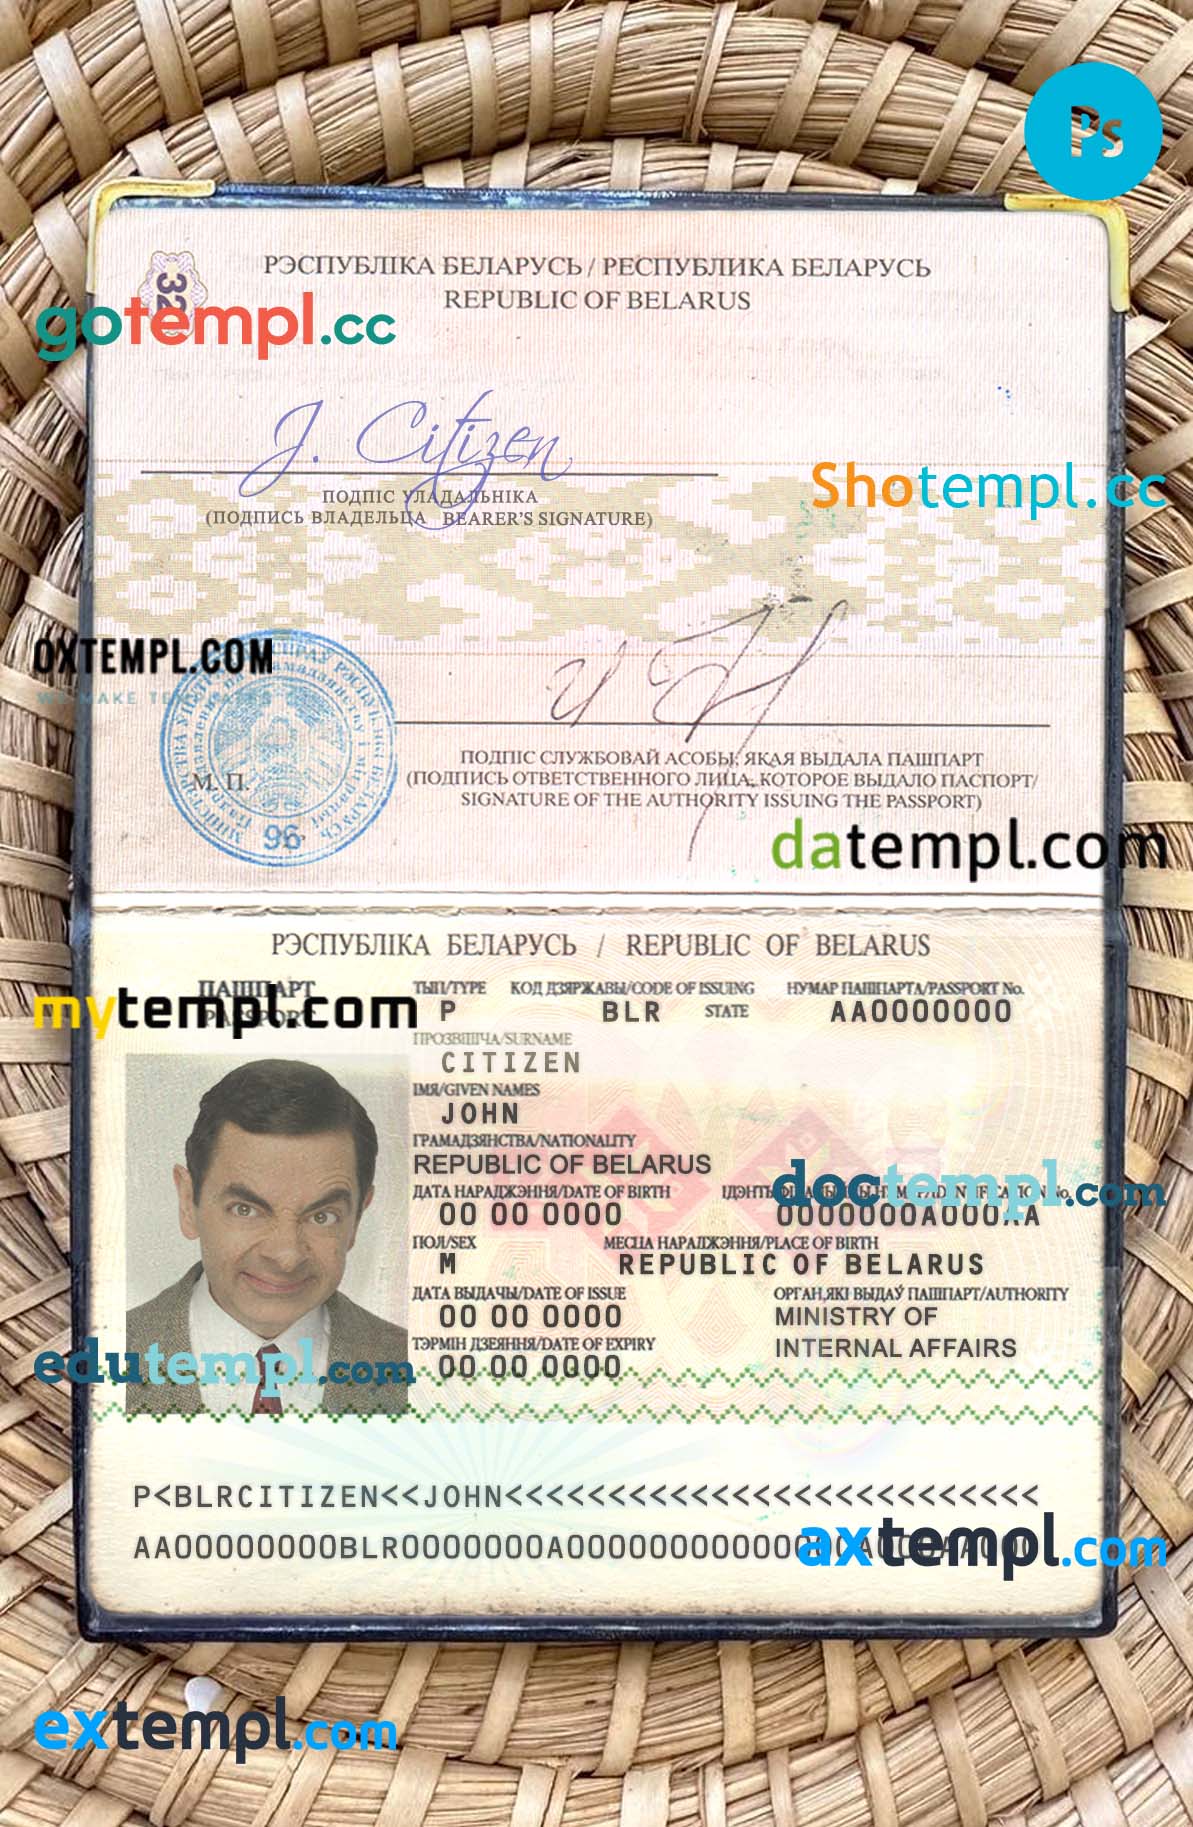 Chad (République du Tchad) passport psd files, editable scan and snapshot sample, 2 in 1